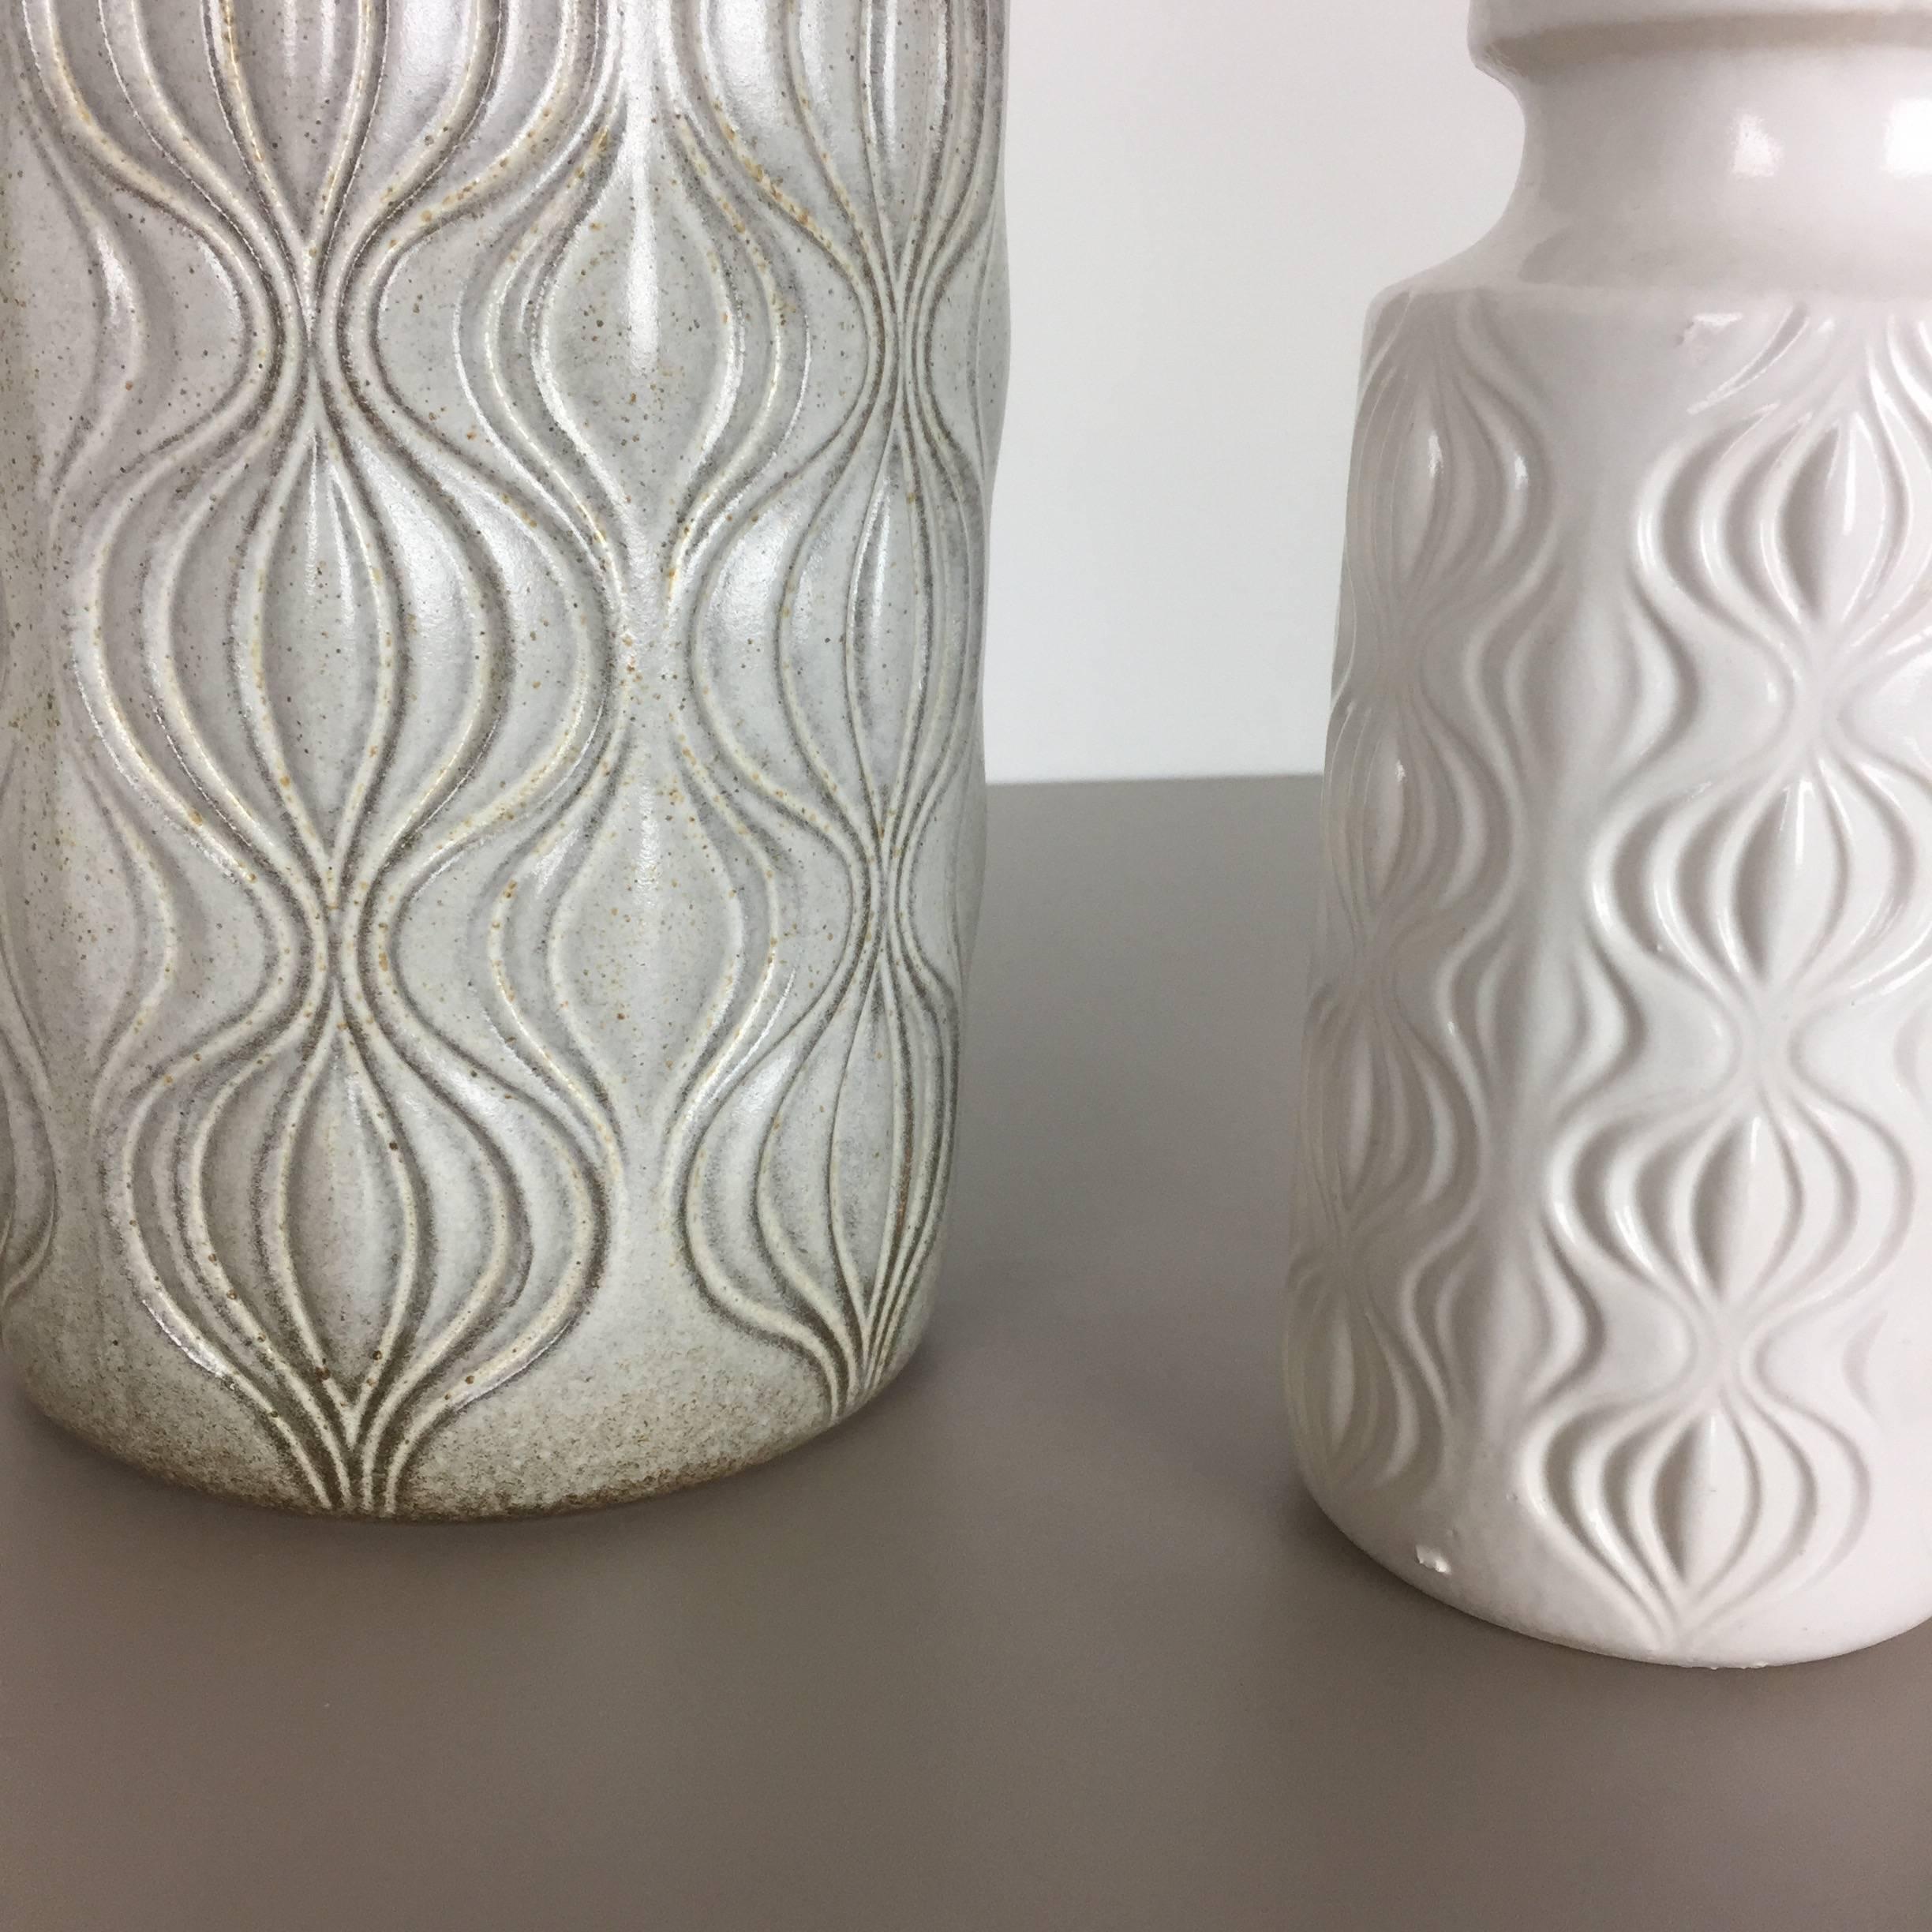 20th Century Set of Two Vintage Pottery Fat Lava 'Onion' Vases Made by Scheurich, Germany